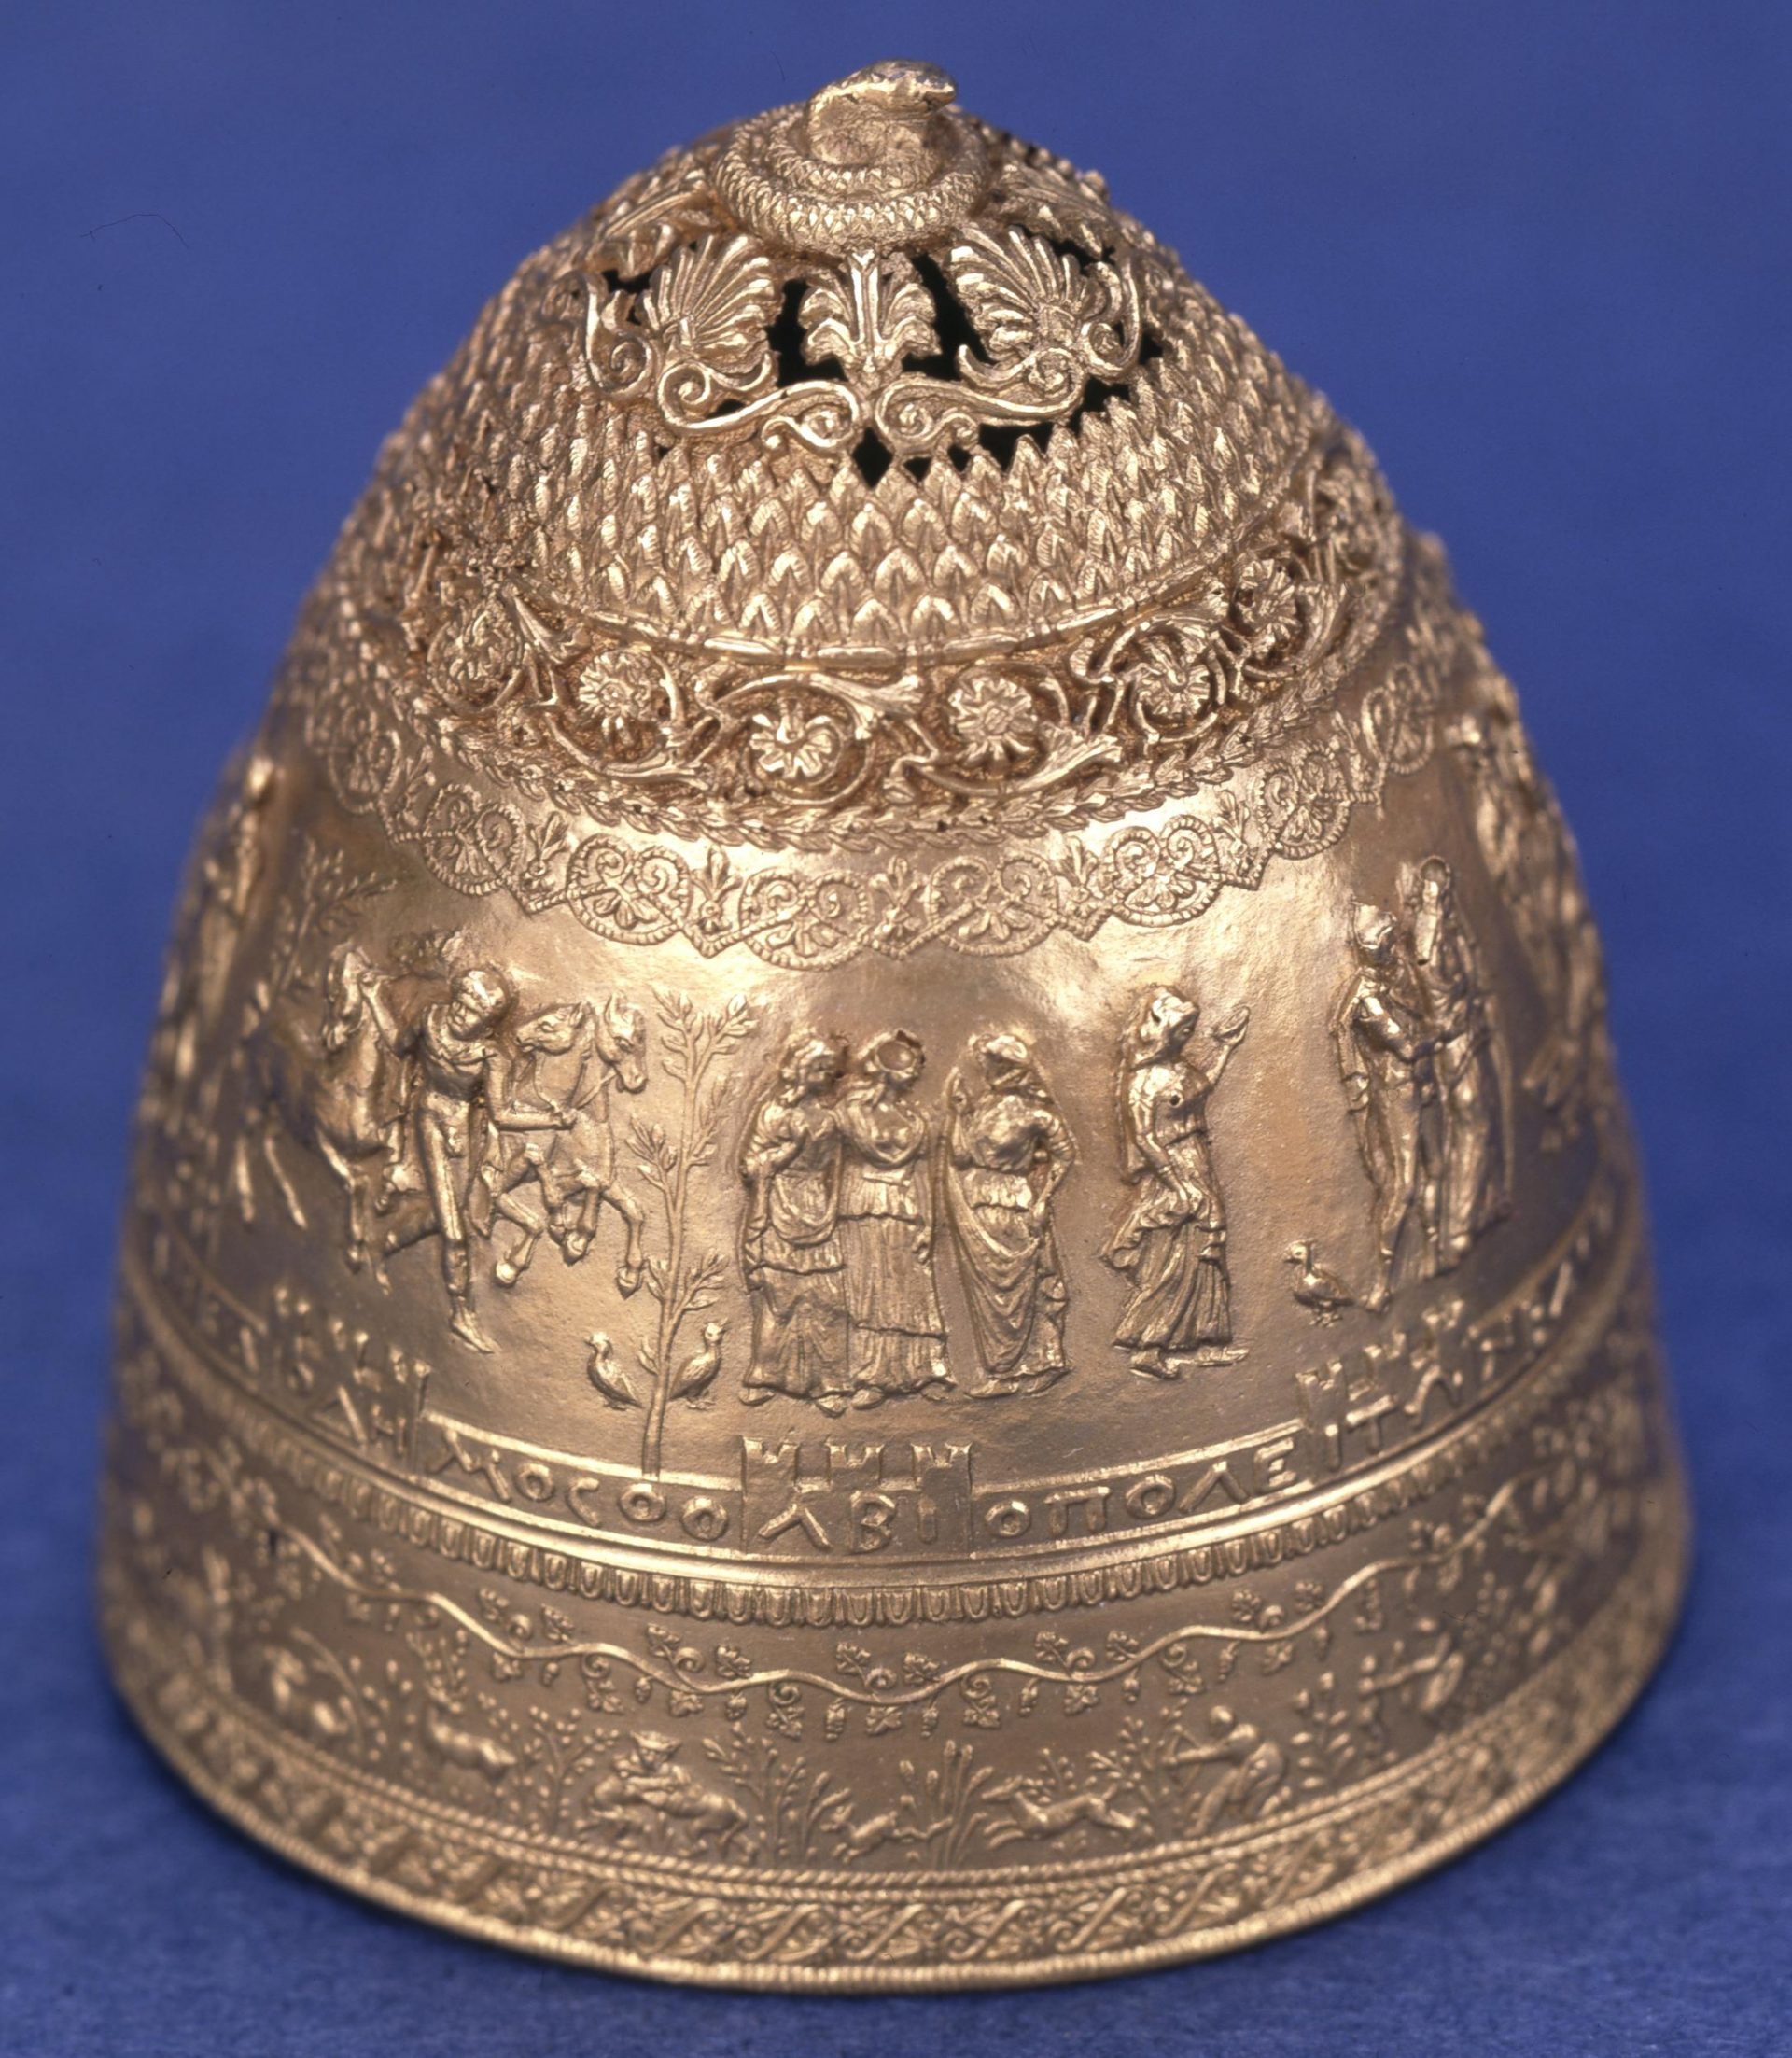 A photograph of an ancient gold crown. The crown appears to be Greek in origin and is cone shaped with figures and shapes decorating its surface.